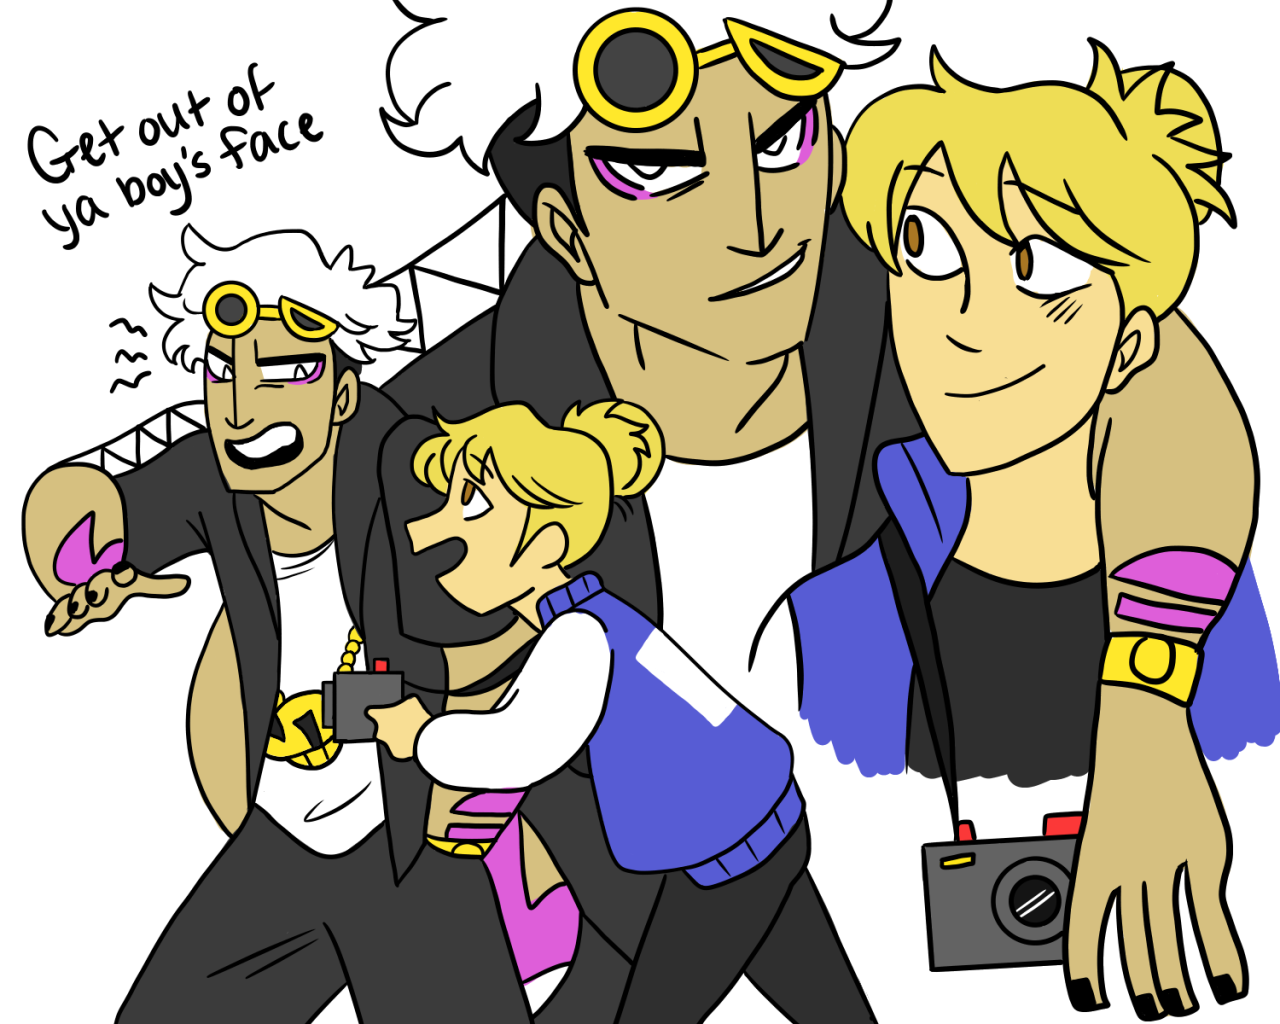 will be releasing a guzma x reader fic so stay... - Home